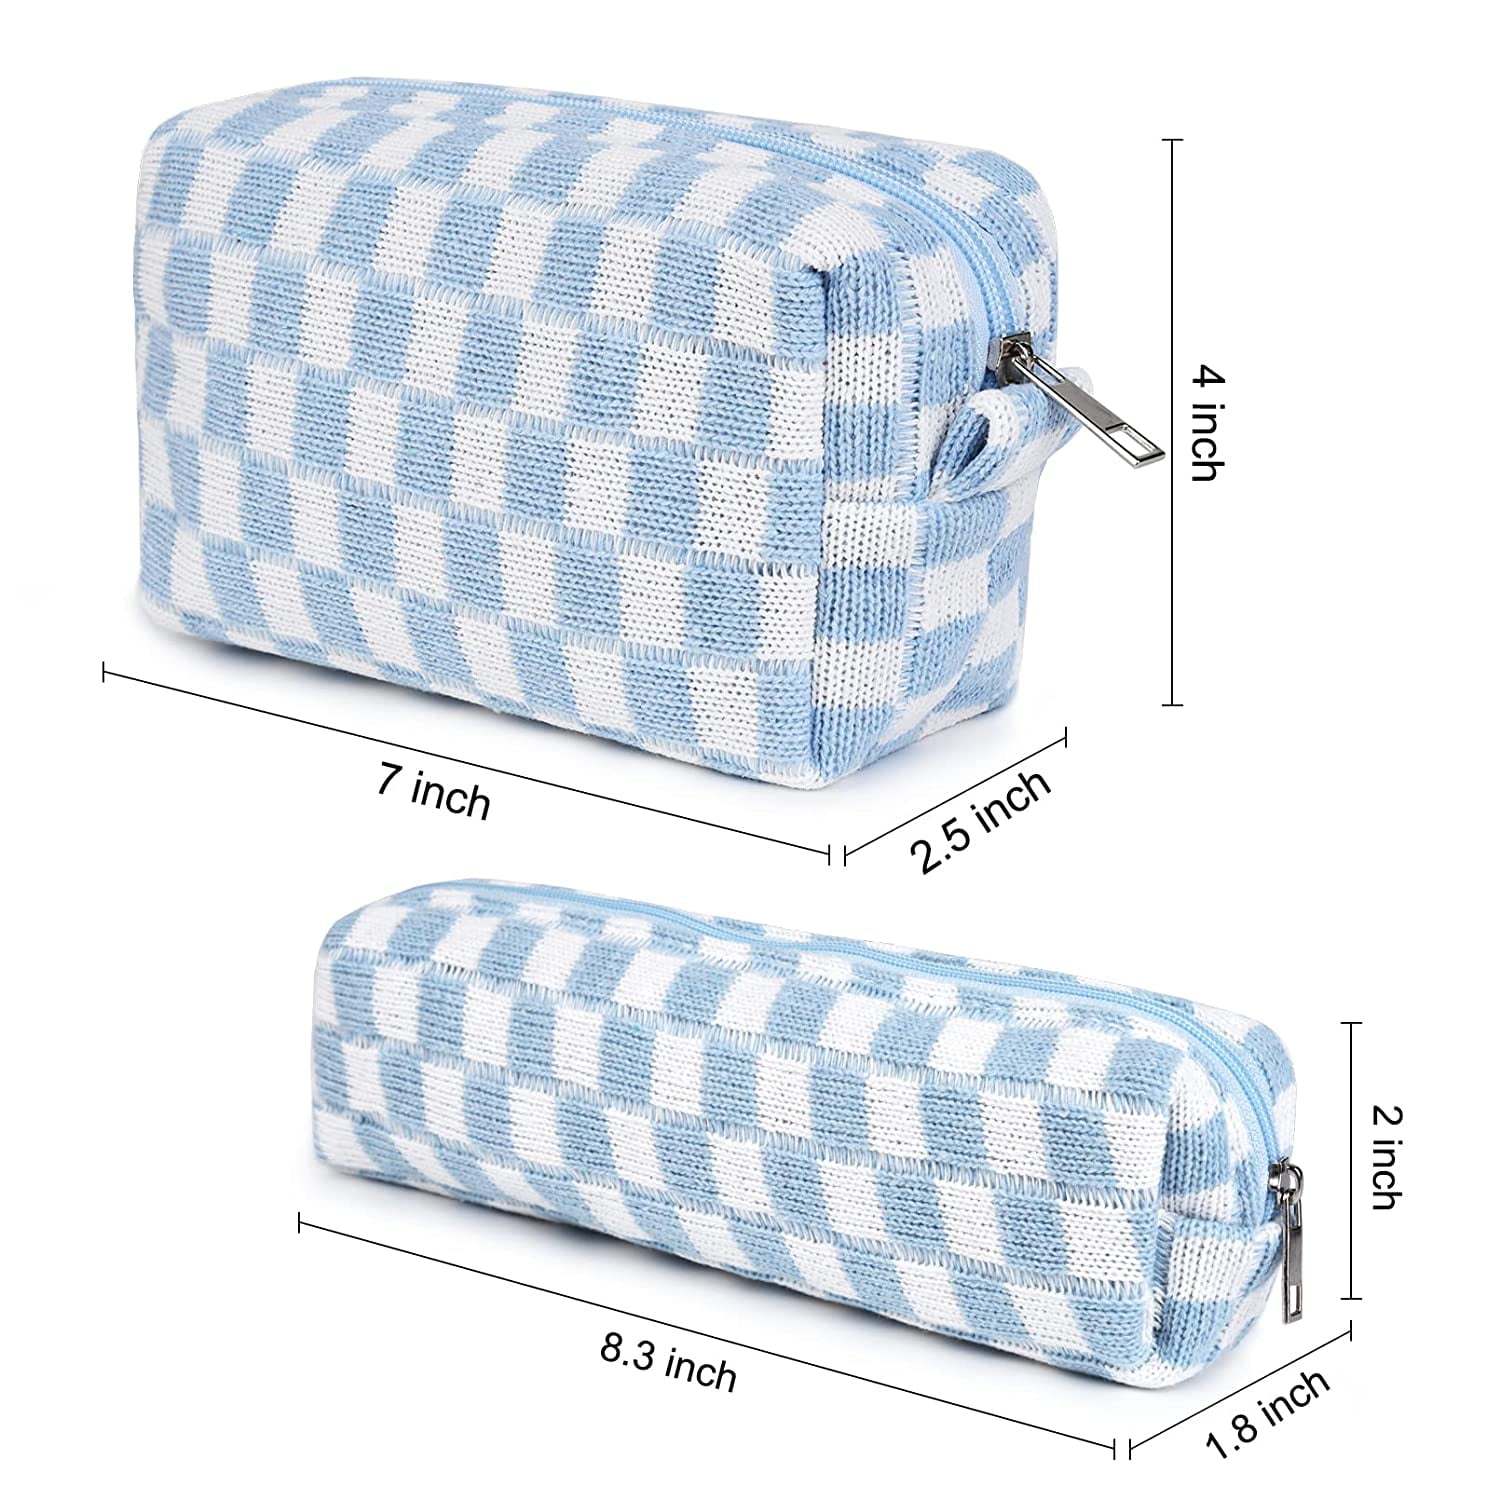 cirea Brown Large Capacity Travel Cosmetic Bag Plaid Checkered Makeup Bag PU Leather Waterproof Skincare Bag with Handle and Divider (Classic White)